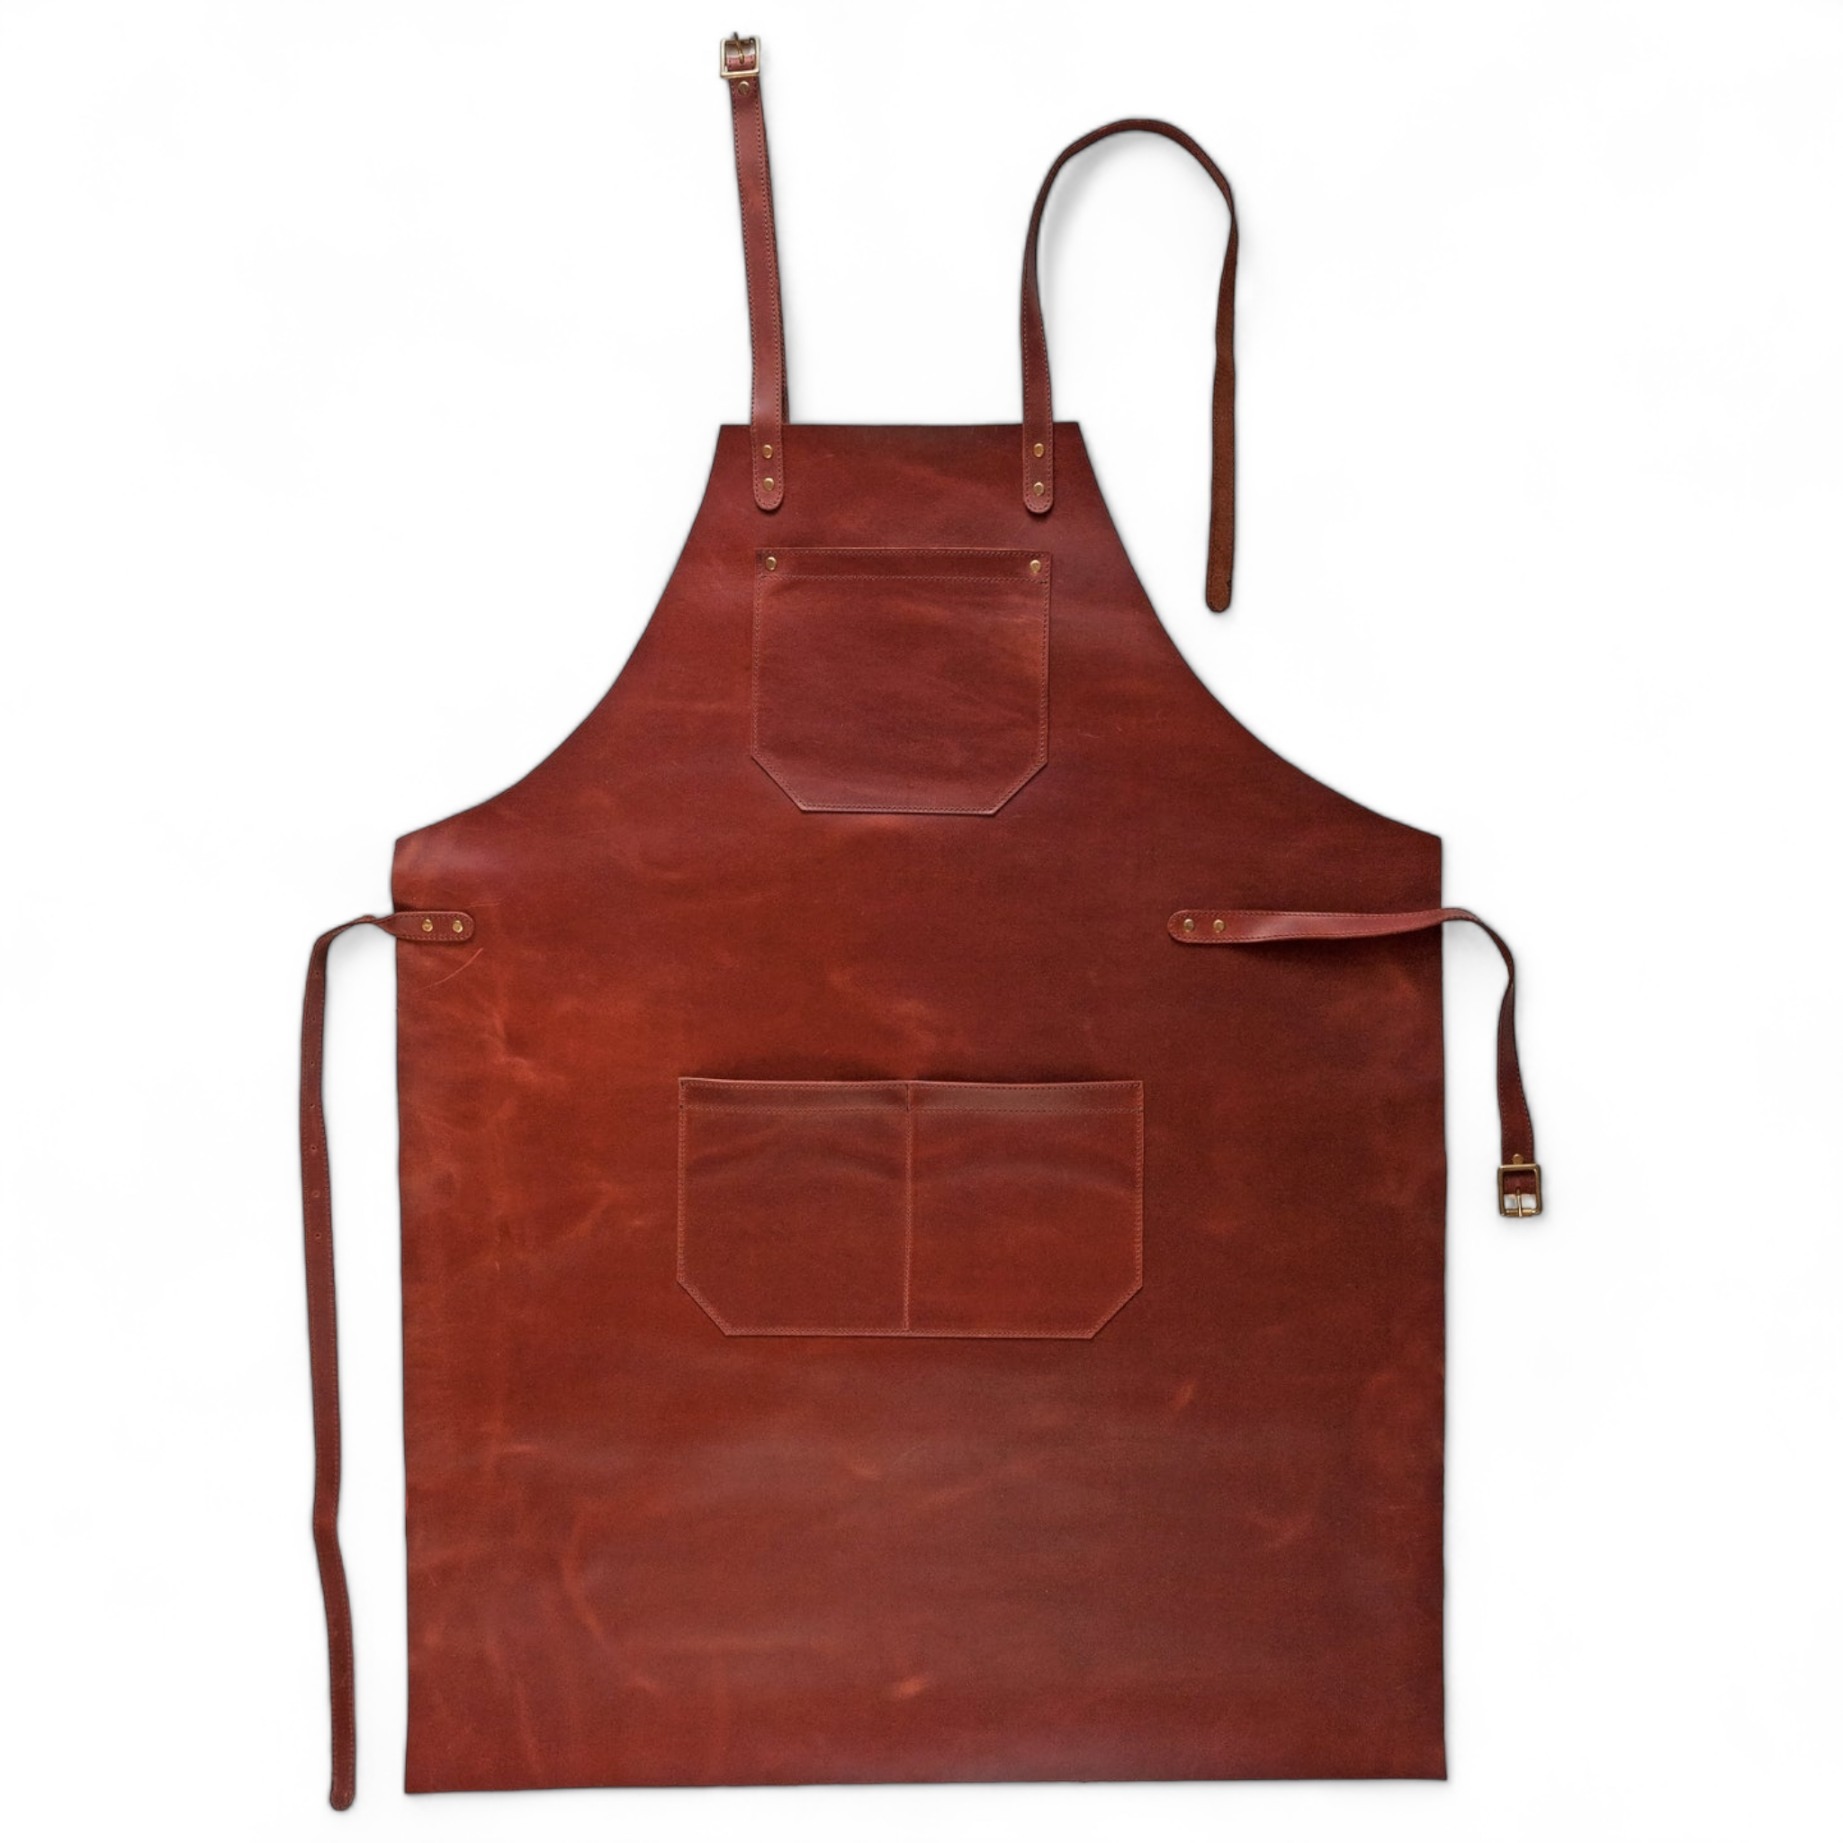 Leather Apron for Woodworking.